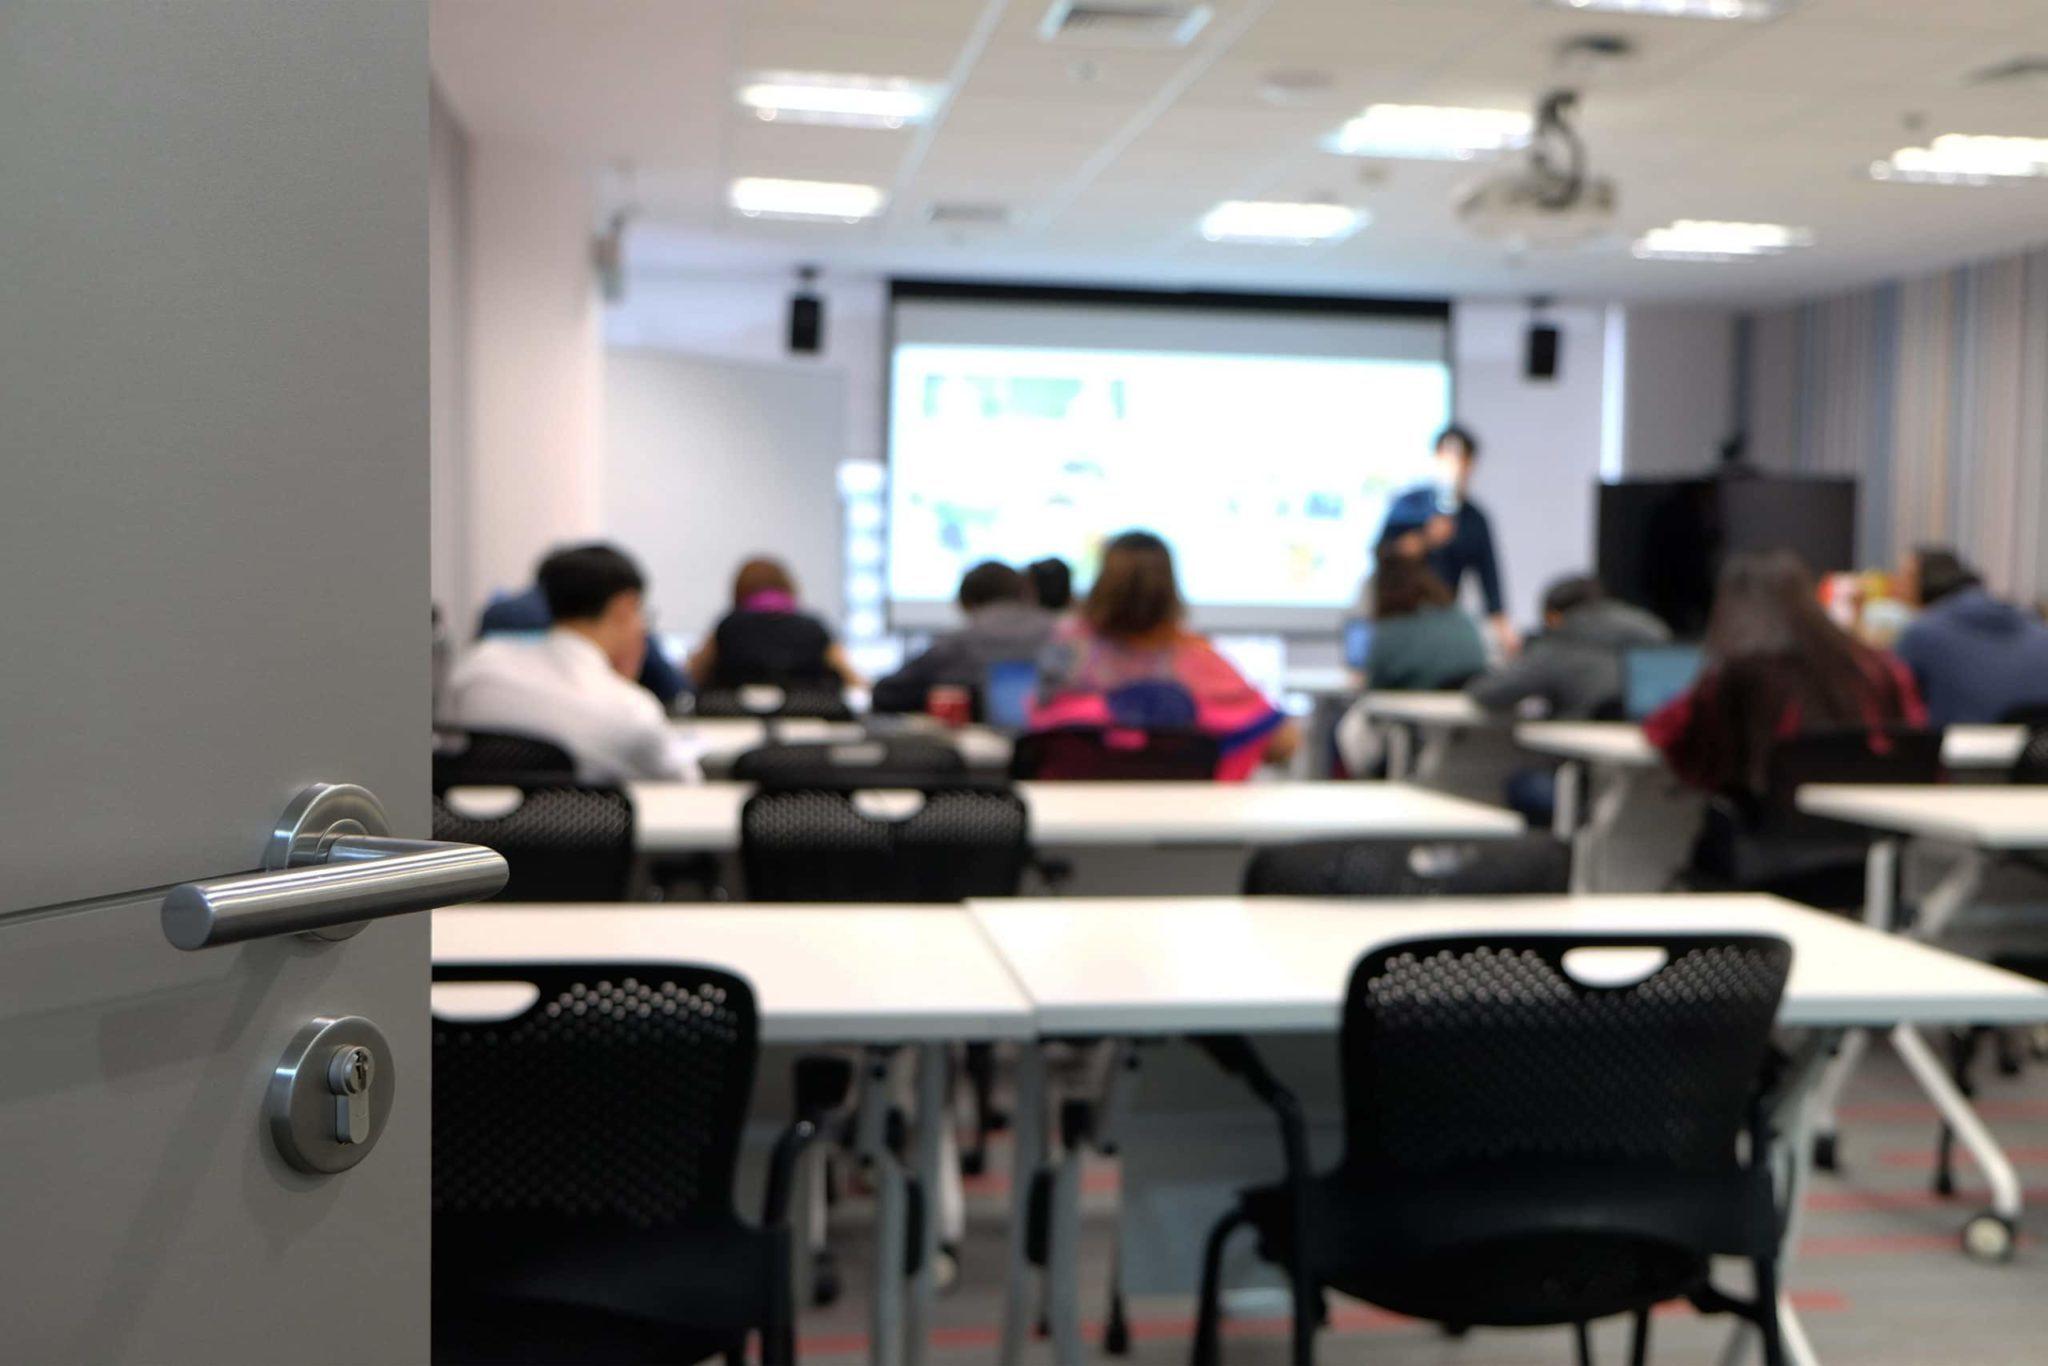 Blurred image of students in a classroom